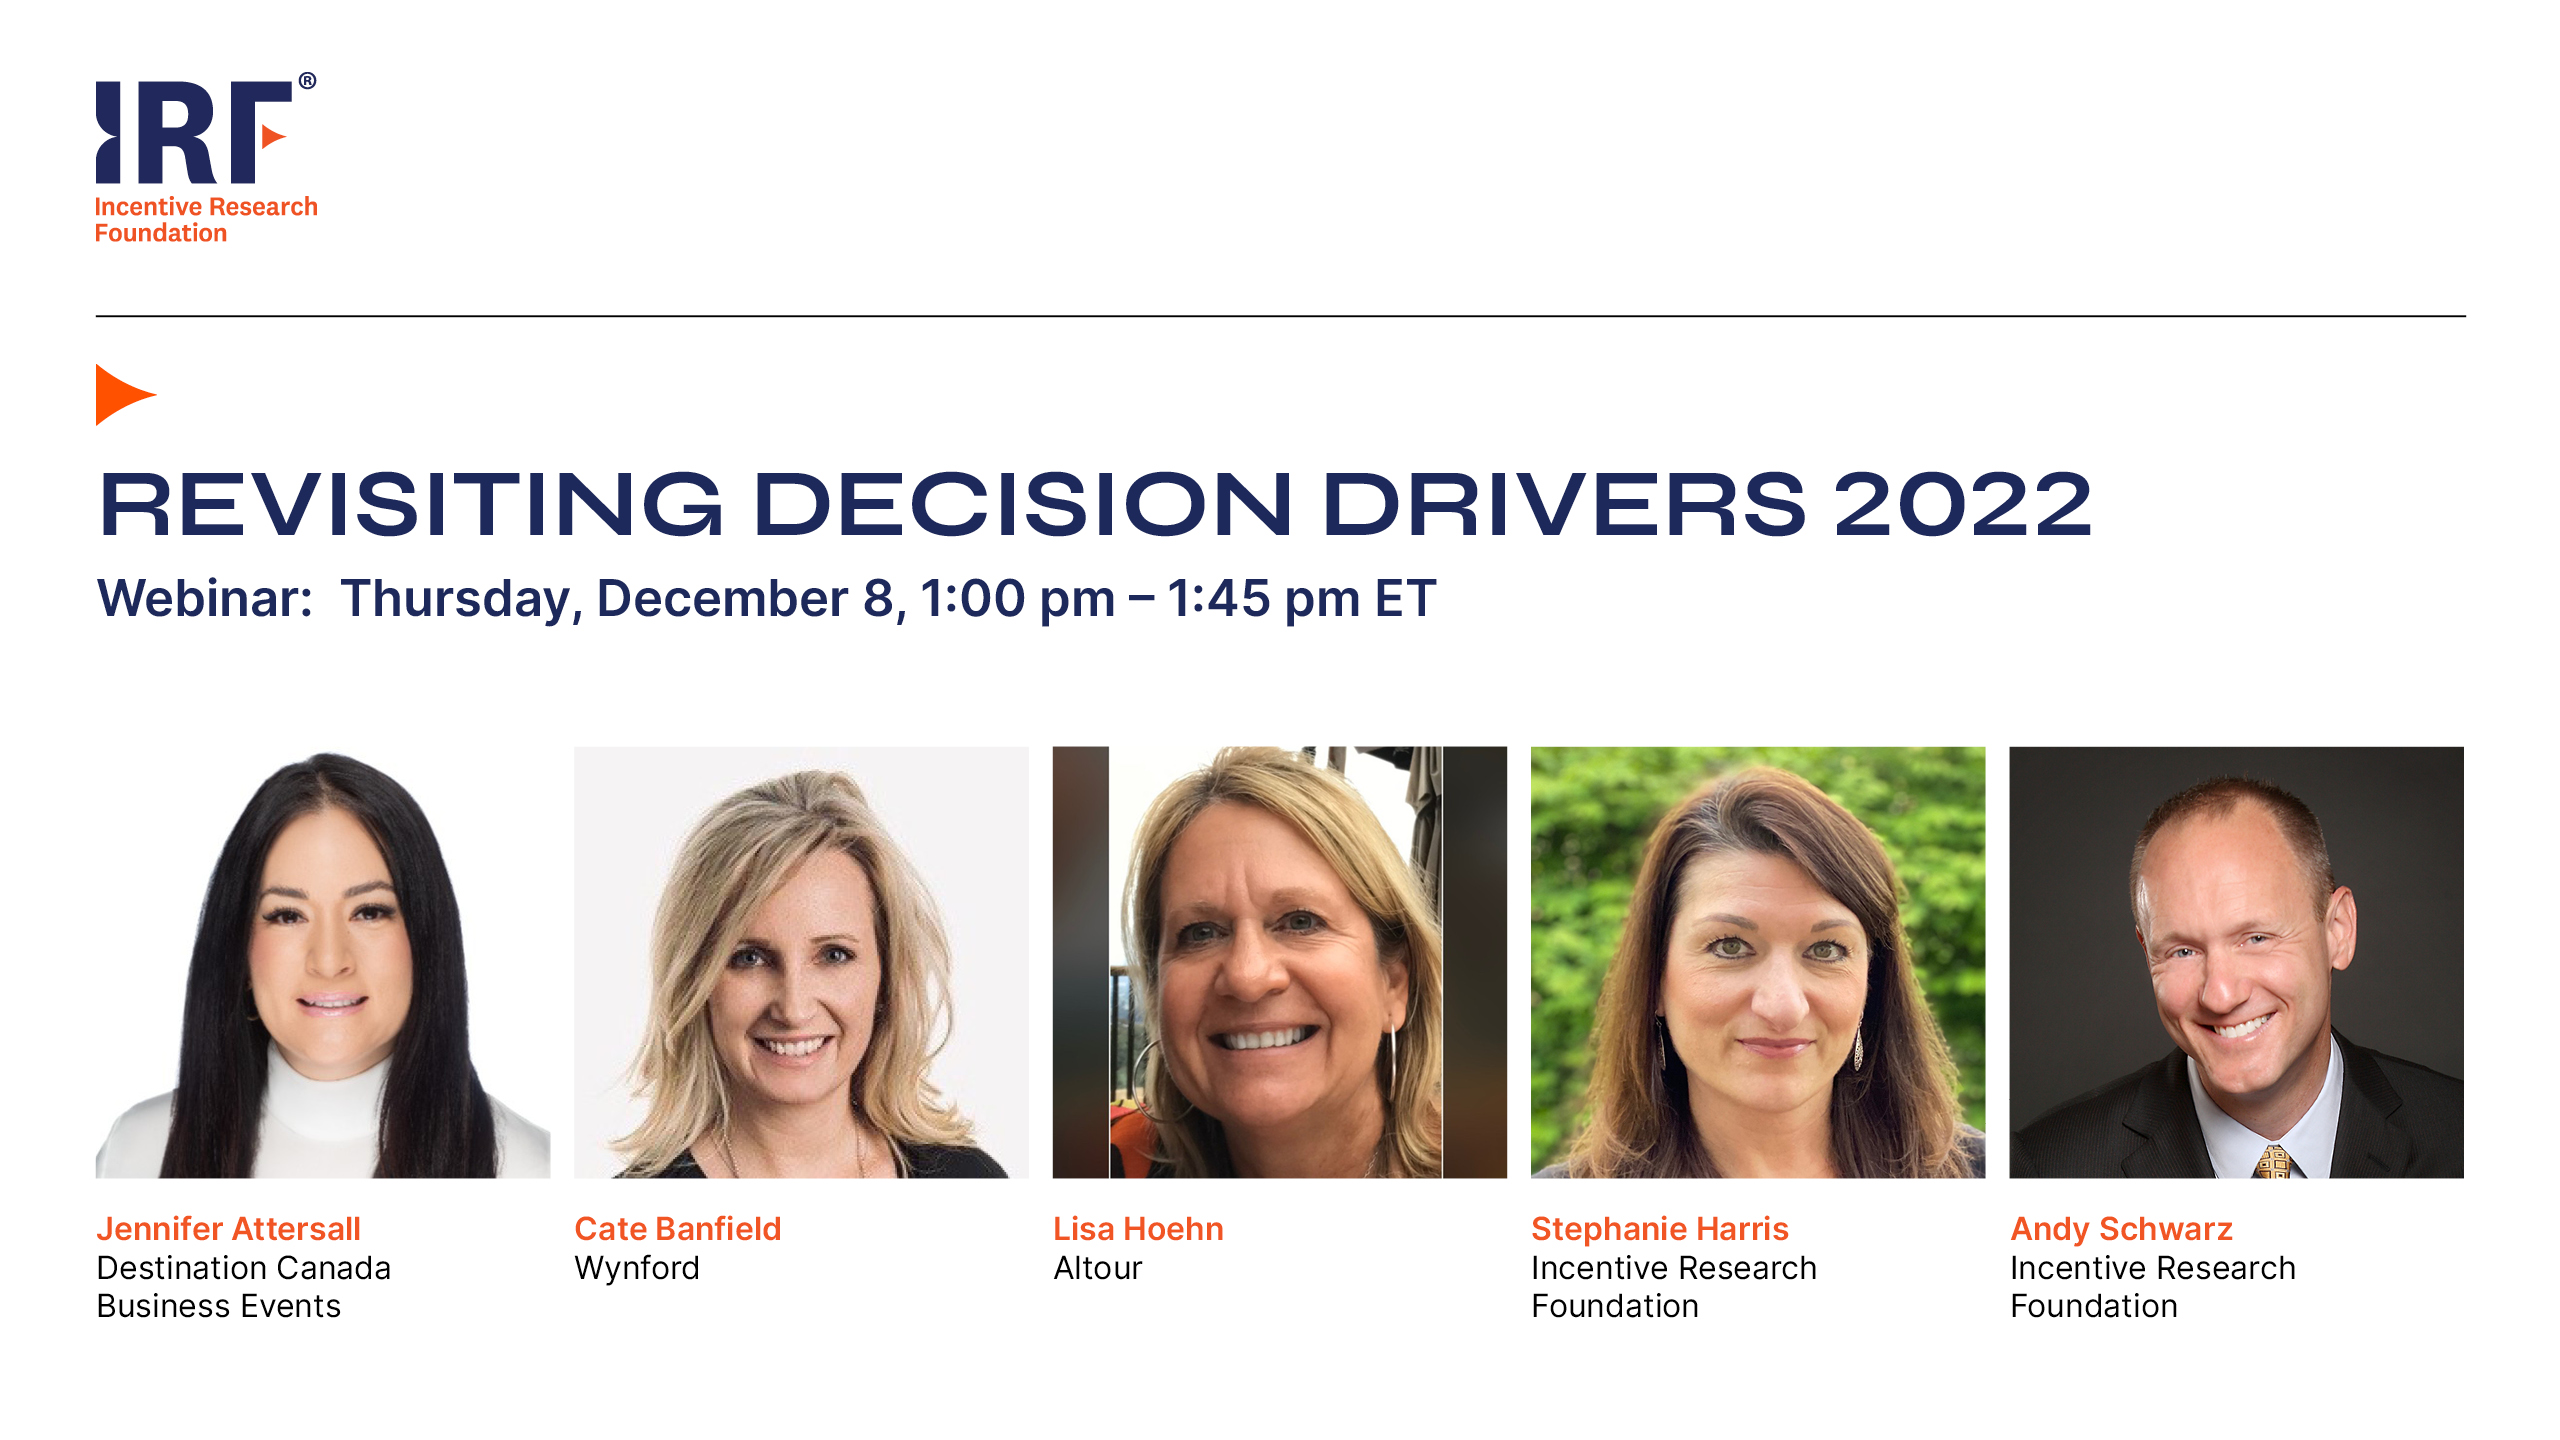 IRF Webinar: Revisiting Decision Drivers 2022